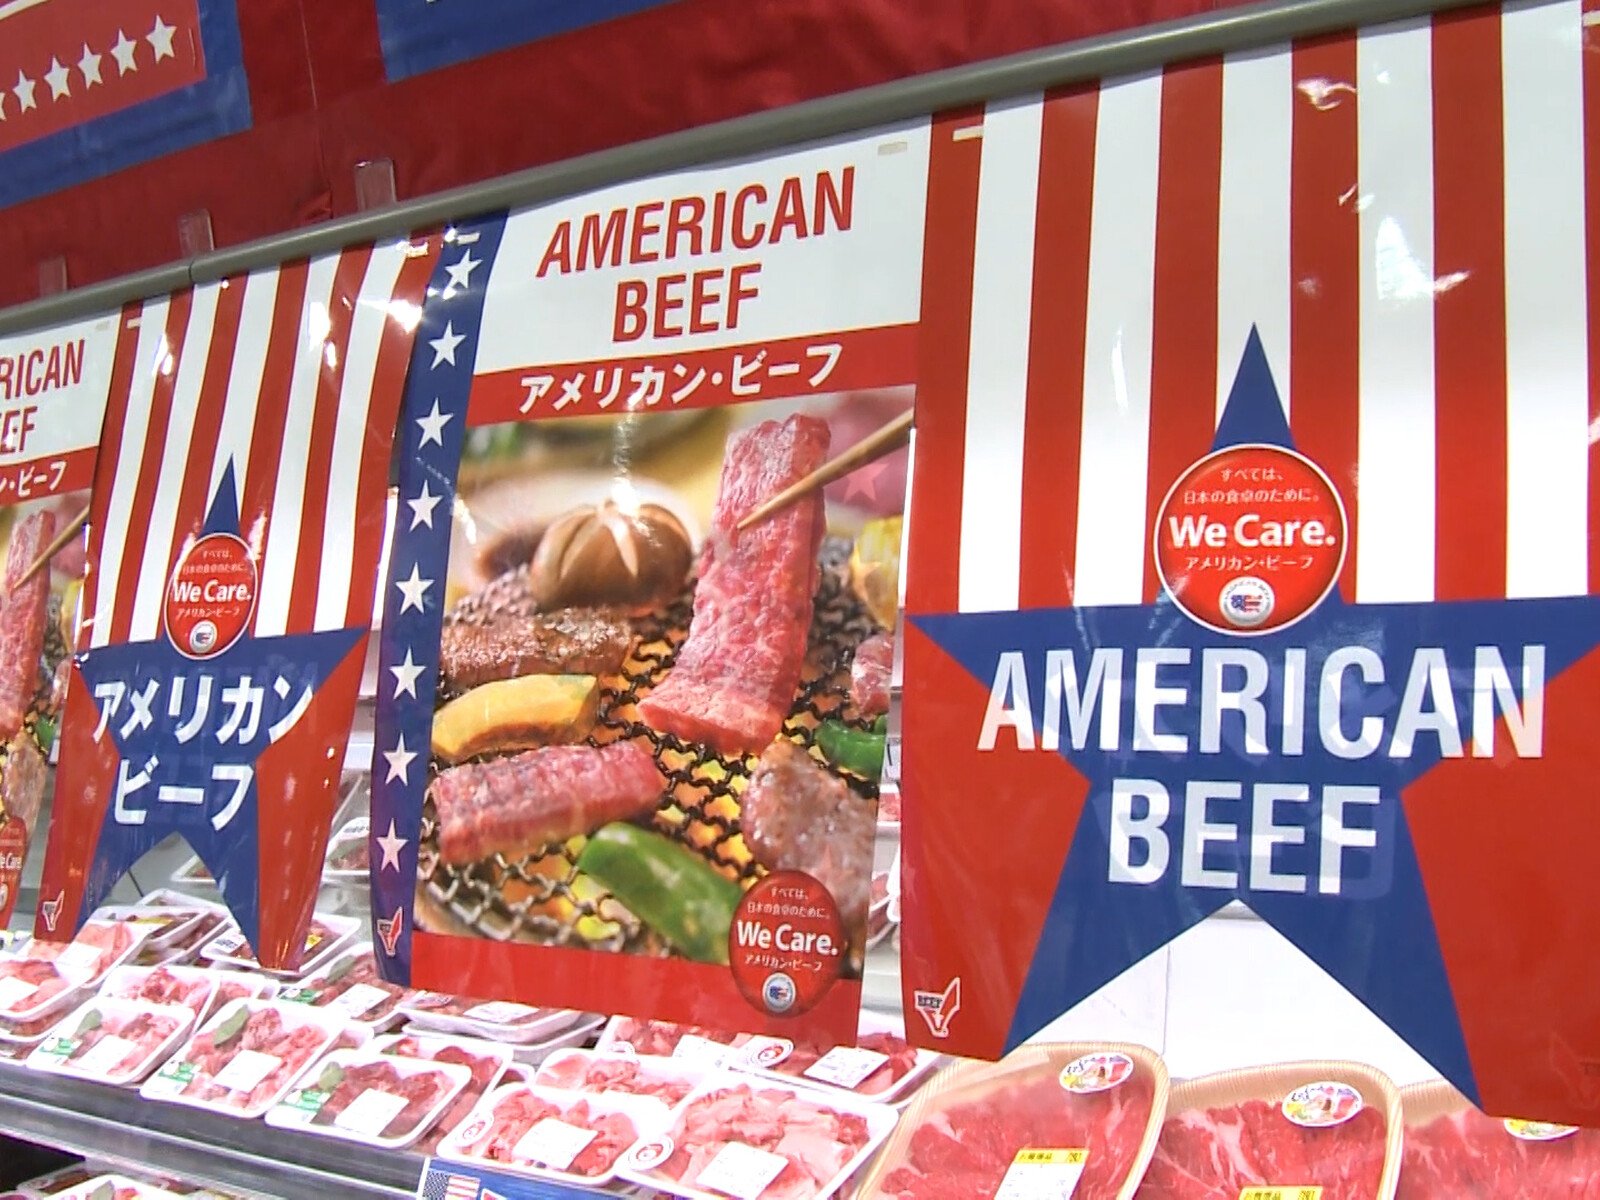 Korean Consumer Confidence in Safety of U.S. Beef Reaches New Heights